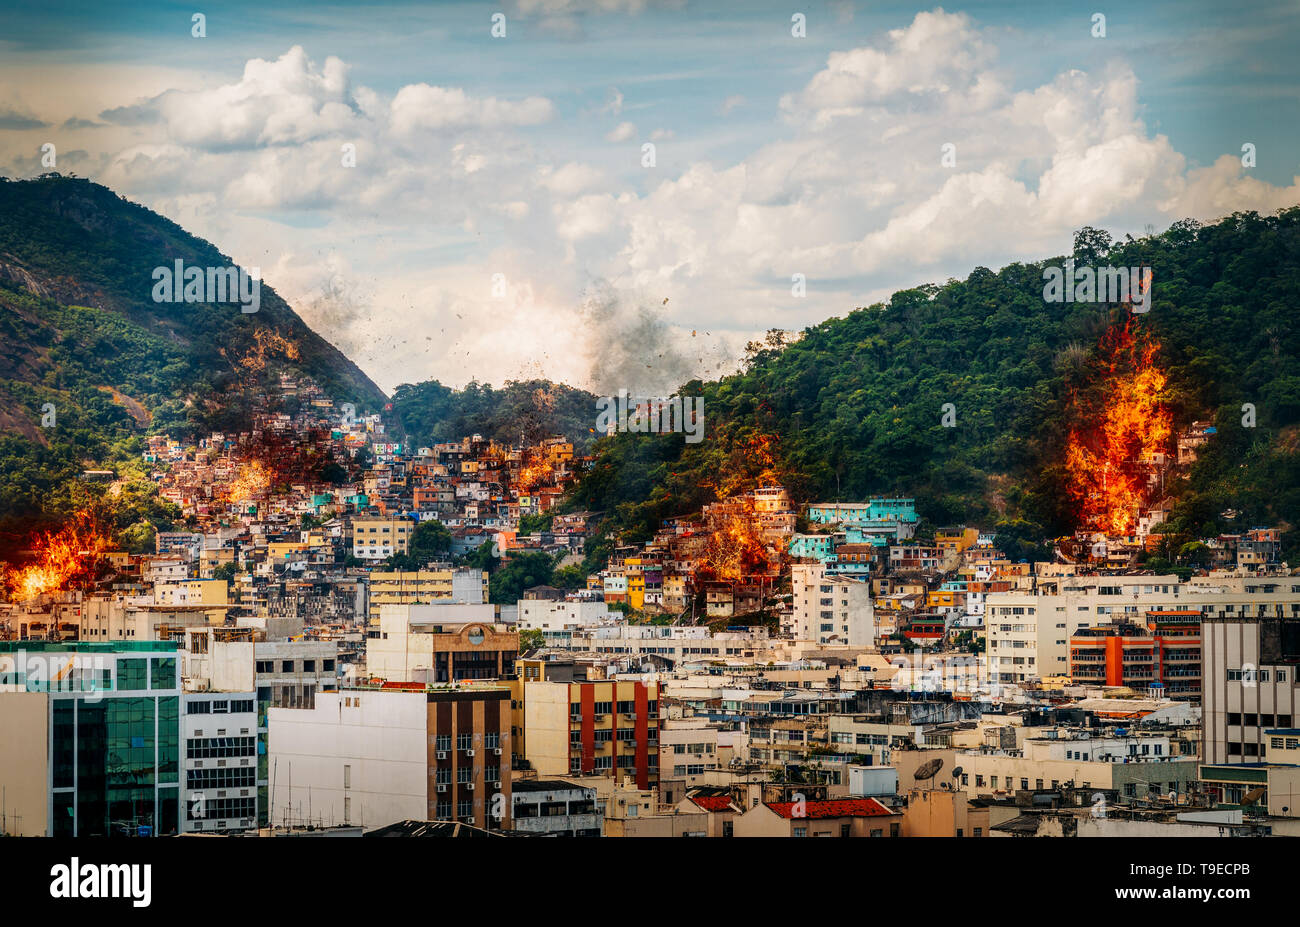 Digital manipulation of fires and smoke from possible gang warfare to control the drug trade in Rio de Janeiro, Brazil slums known as favelas Stock Photo